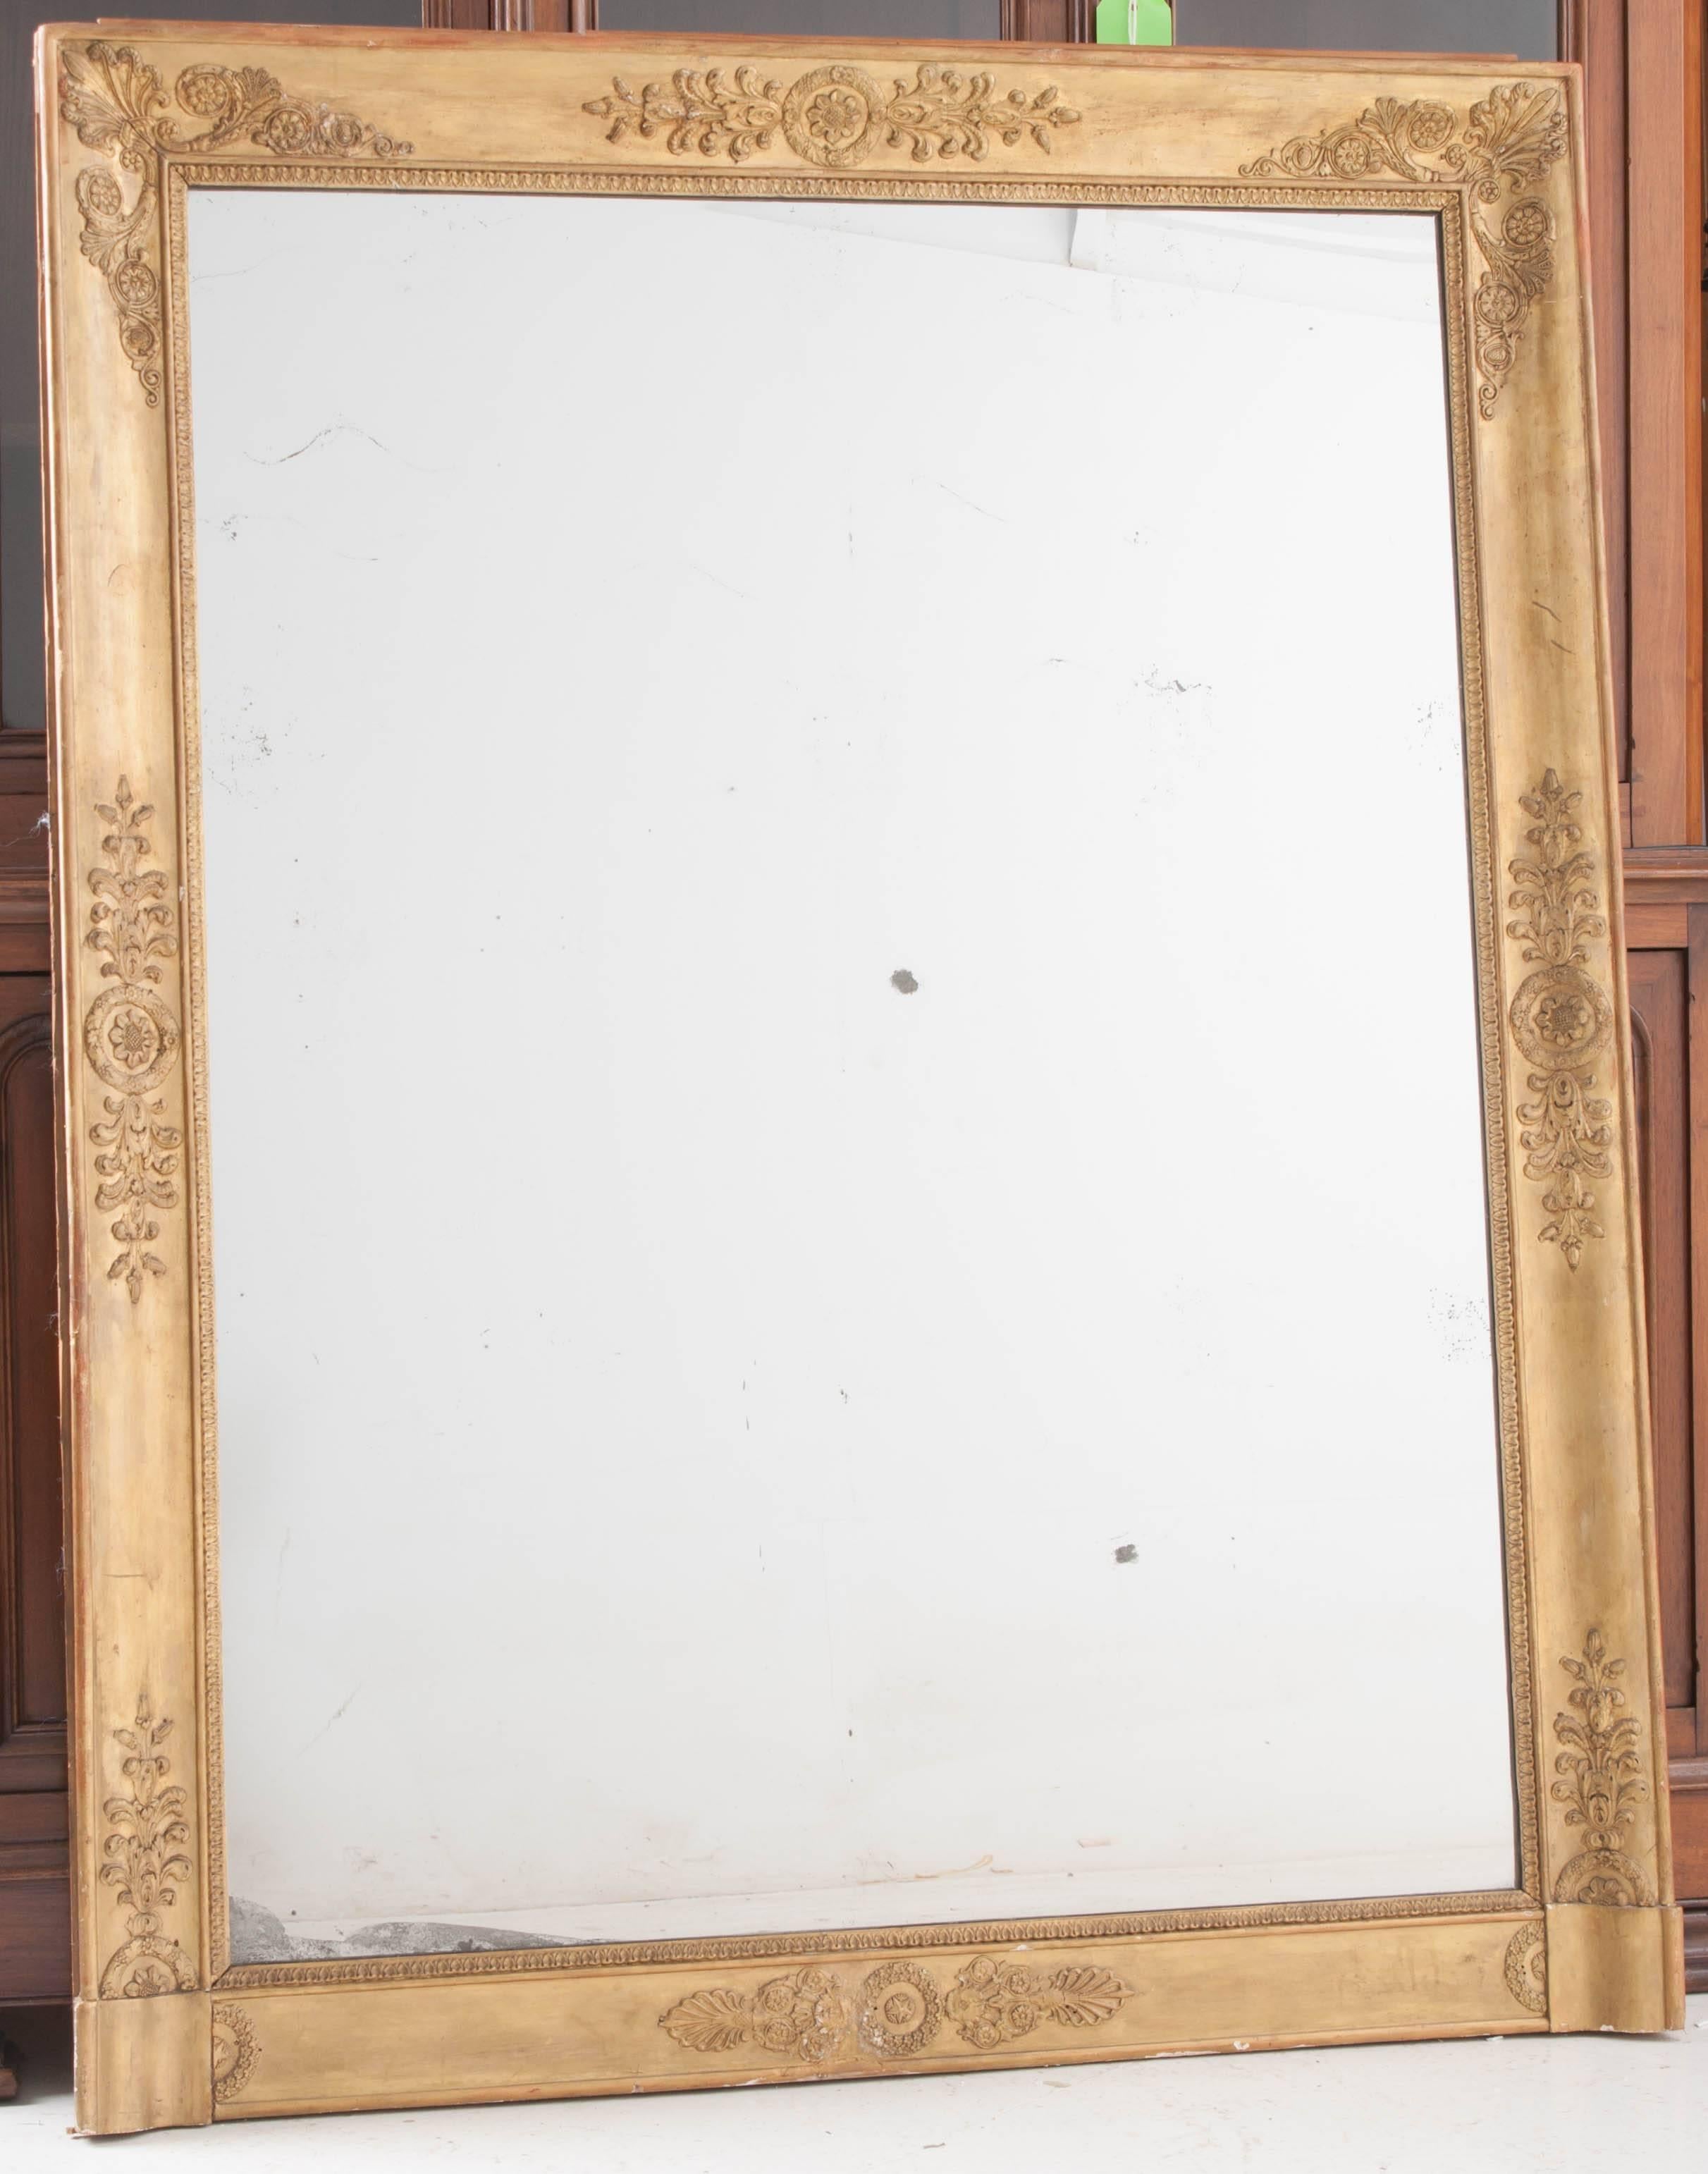 This 19th century Empire period mirror boasts exquisite gold gilt and neoclassical carvings that surround its original glass. The original mercury glass has magnificent foxing and sparkles. A warm patina envelops the entire mirror, adding to its